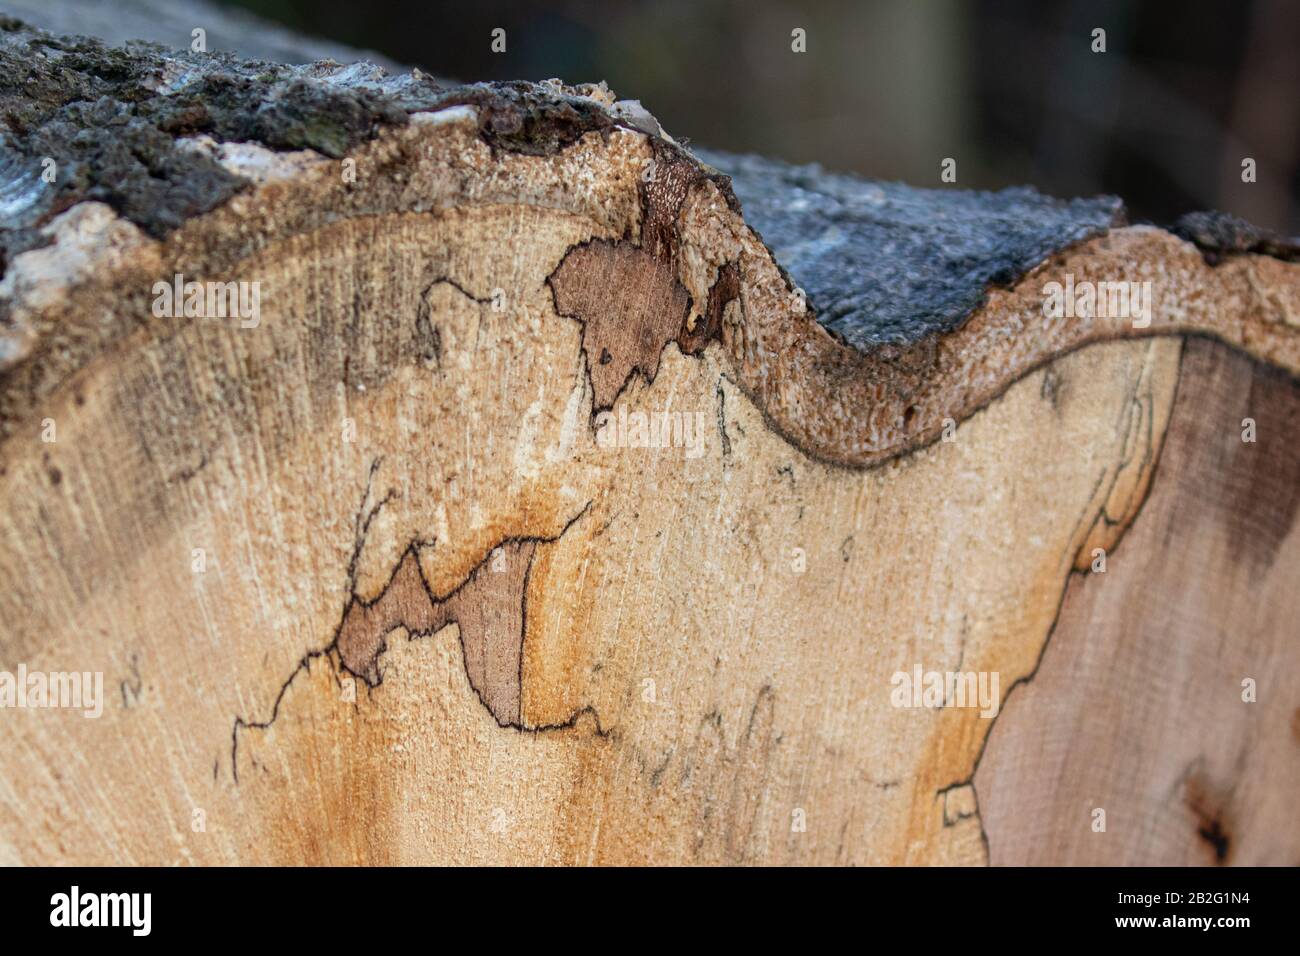 A piece of wood with visible bark and wood grain Stock Photo